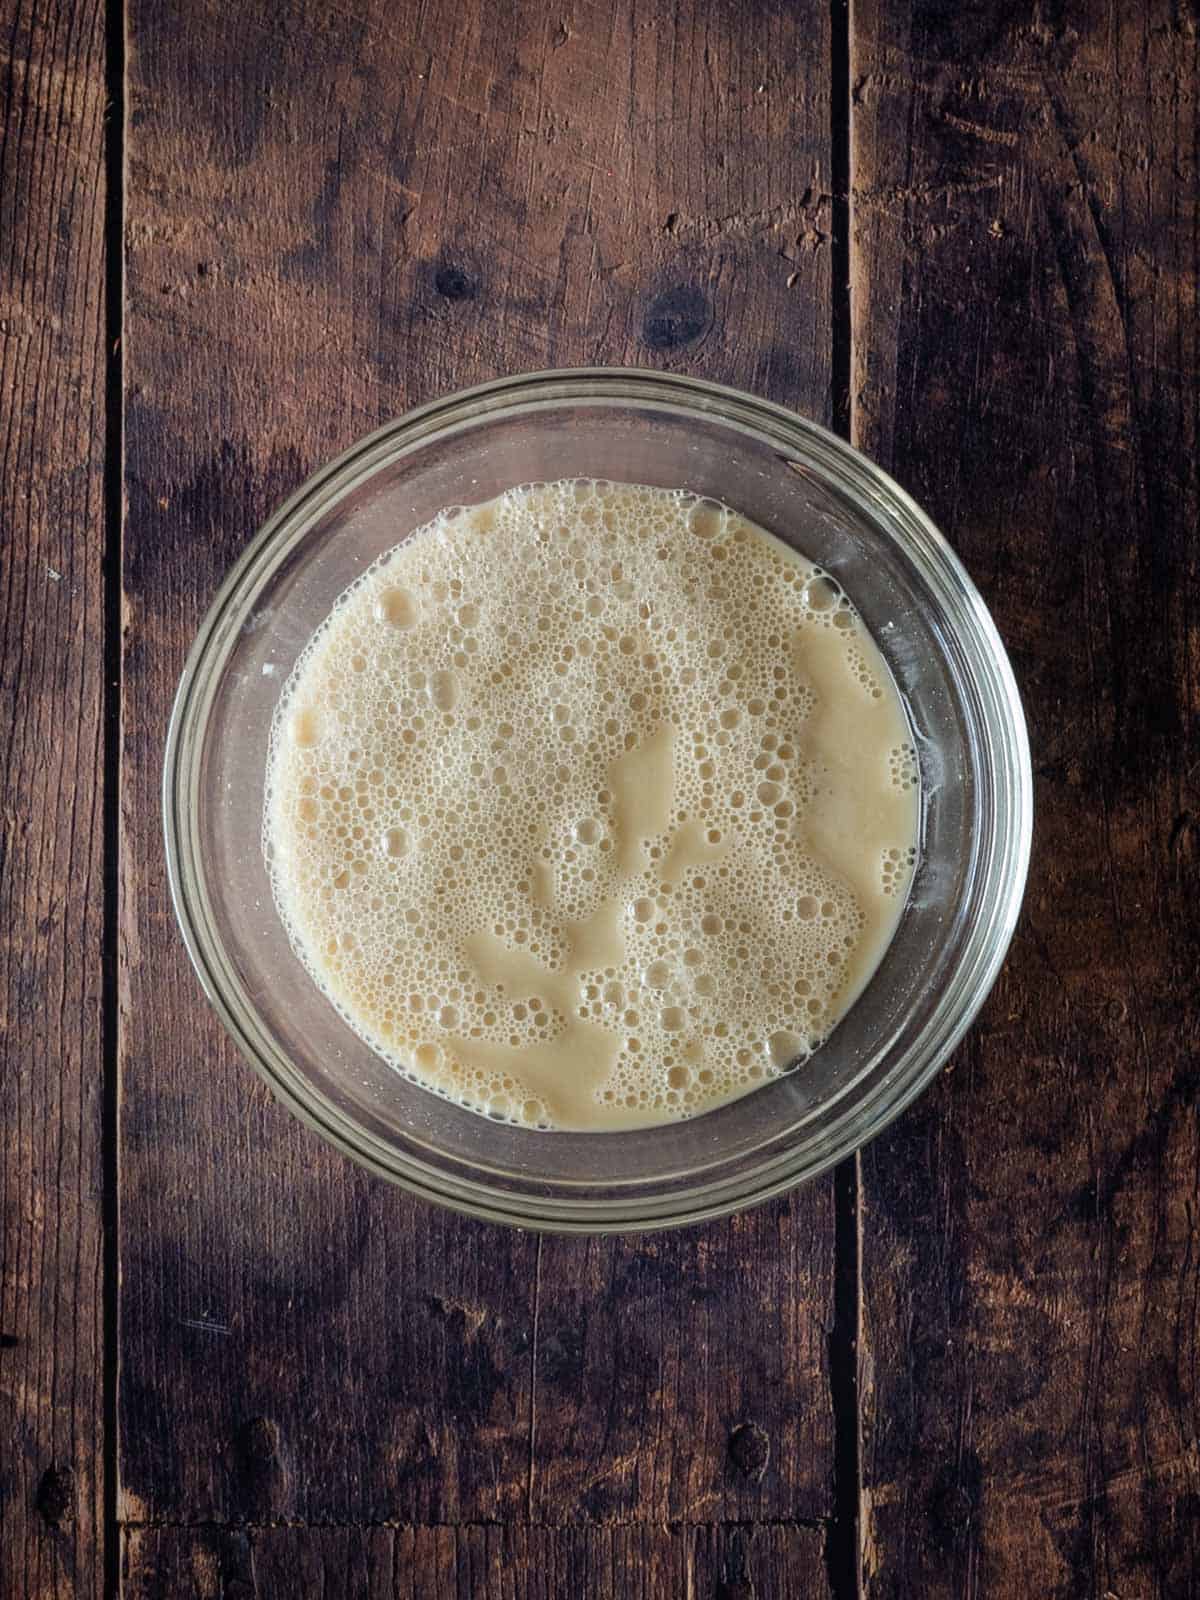 let the yeast sit with the sugar and water for five minutes.